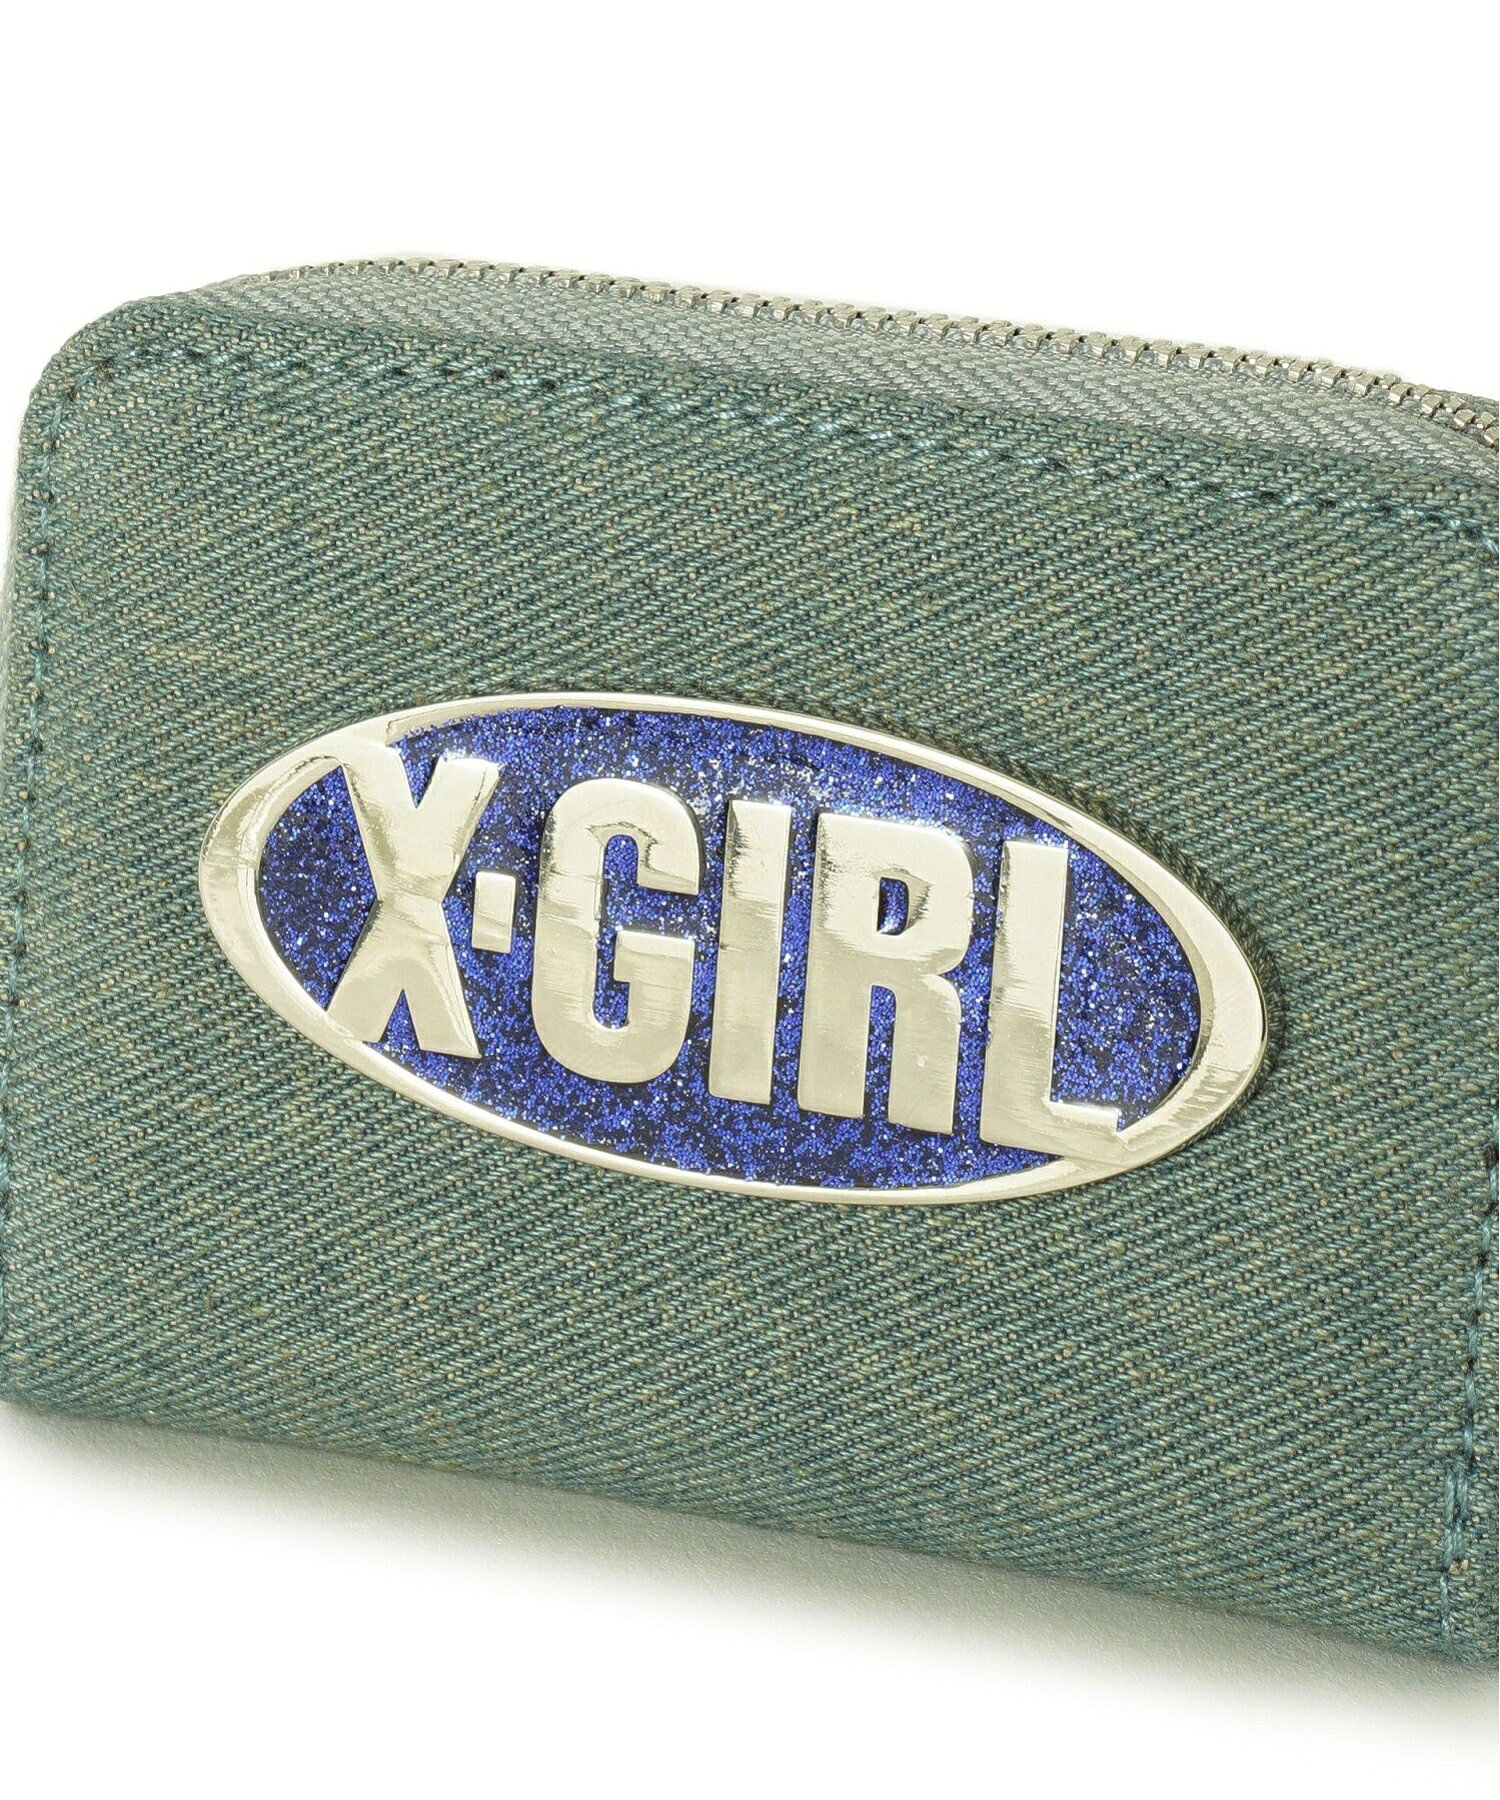 GLITTER OVAL LOGO COIN AND CARD CASE コイン